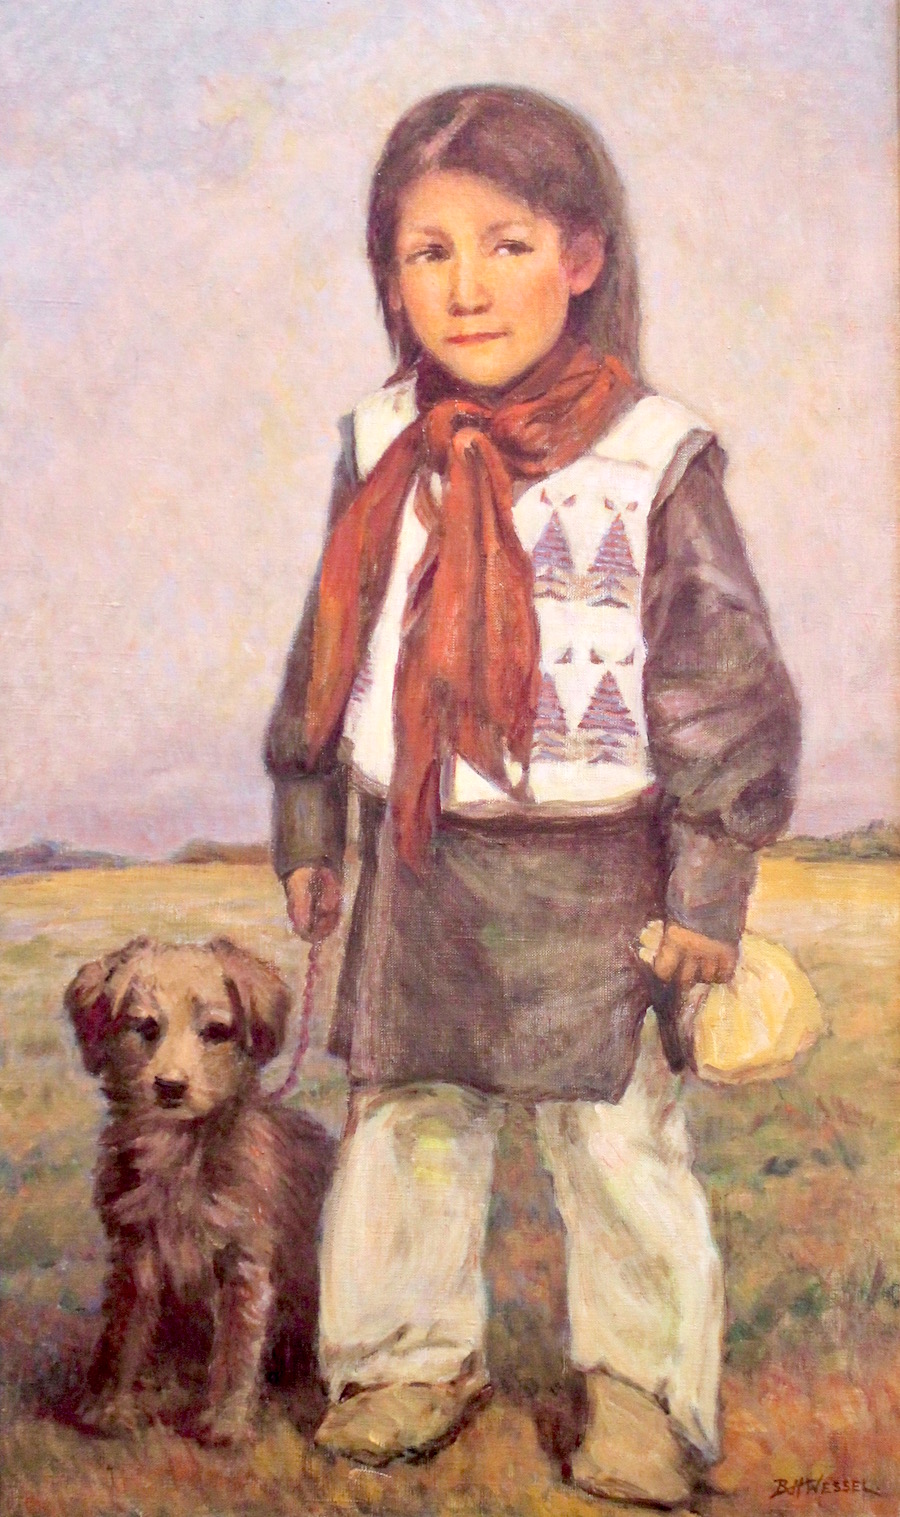 SOLD. "Indian Boy with Puppy"